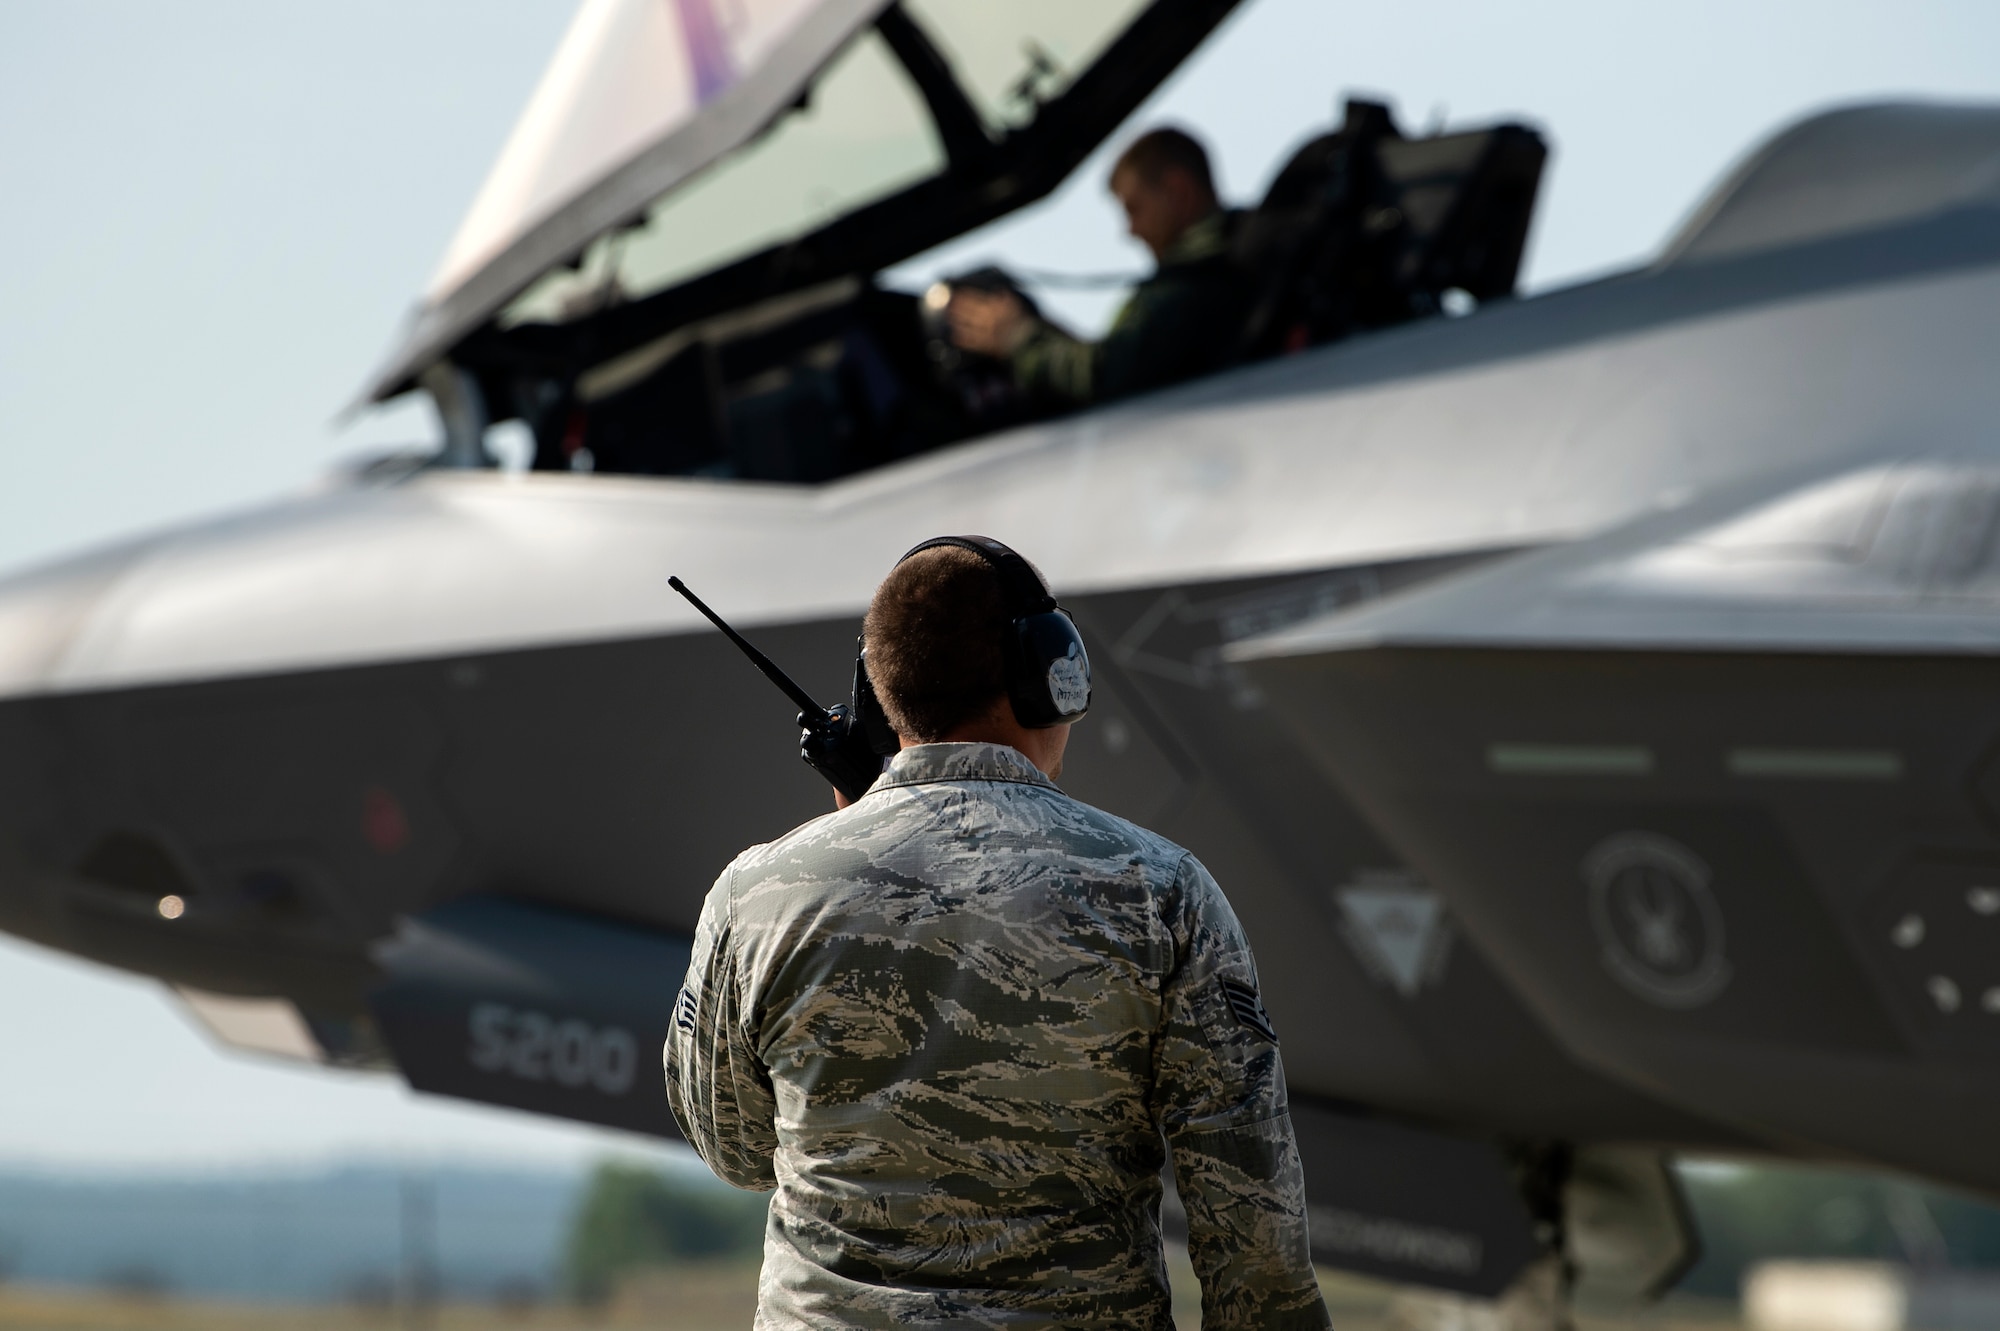 U.S. Air Force Capt. Joseph Walz, 421st Fighter Squadron F-35A Lightning II pilot, and Staff Sgt. David Sasak, 421st FS crew chief, conduct a pre-flight check during Operation Rapid Forge at Spangdahlem Air Base, Germany, July 18, 2019. Rapid Forge aircraft are forward deploying to train in coordination with NATO allies. Conducting exercises and operations with allied forces increases the U.S. Air Force's ability to quickly respond to potential threats. (U.S. Air Force photo by Airman 1st Class Valerie Seelye)